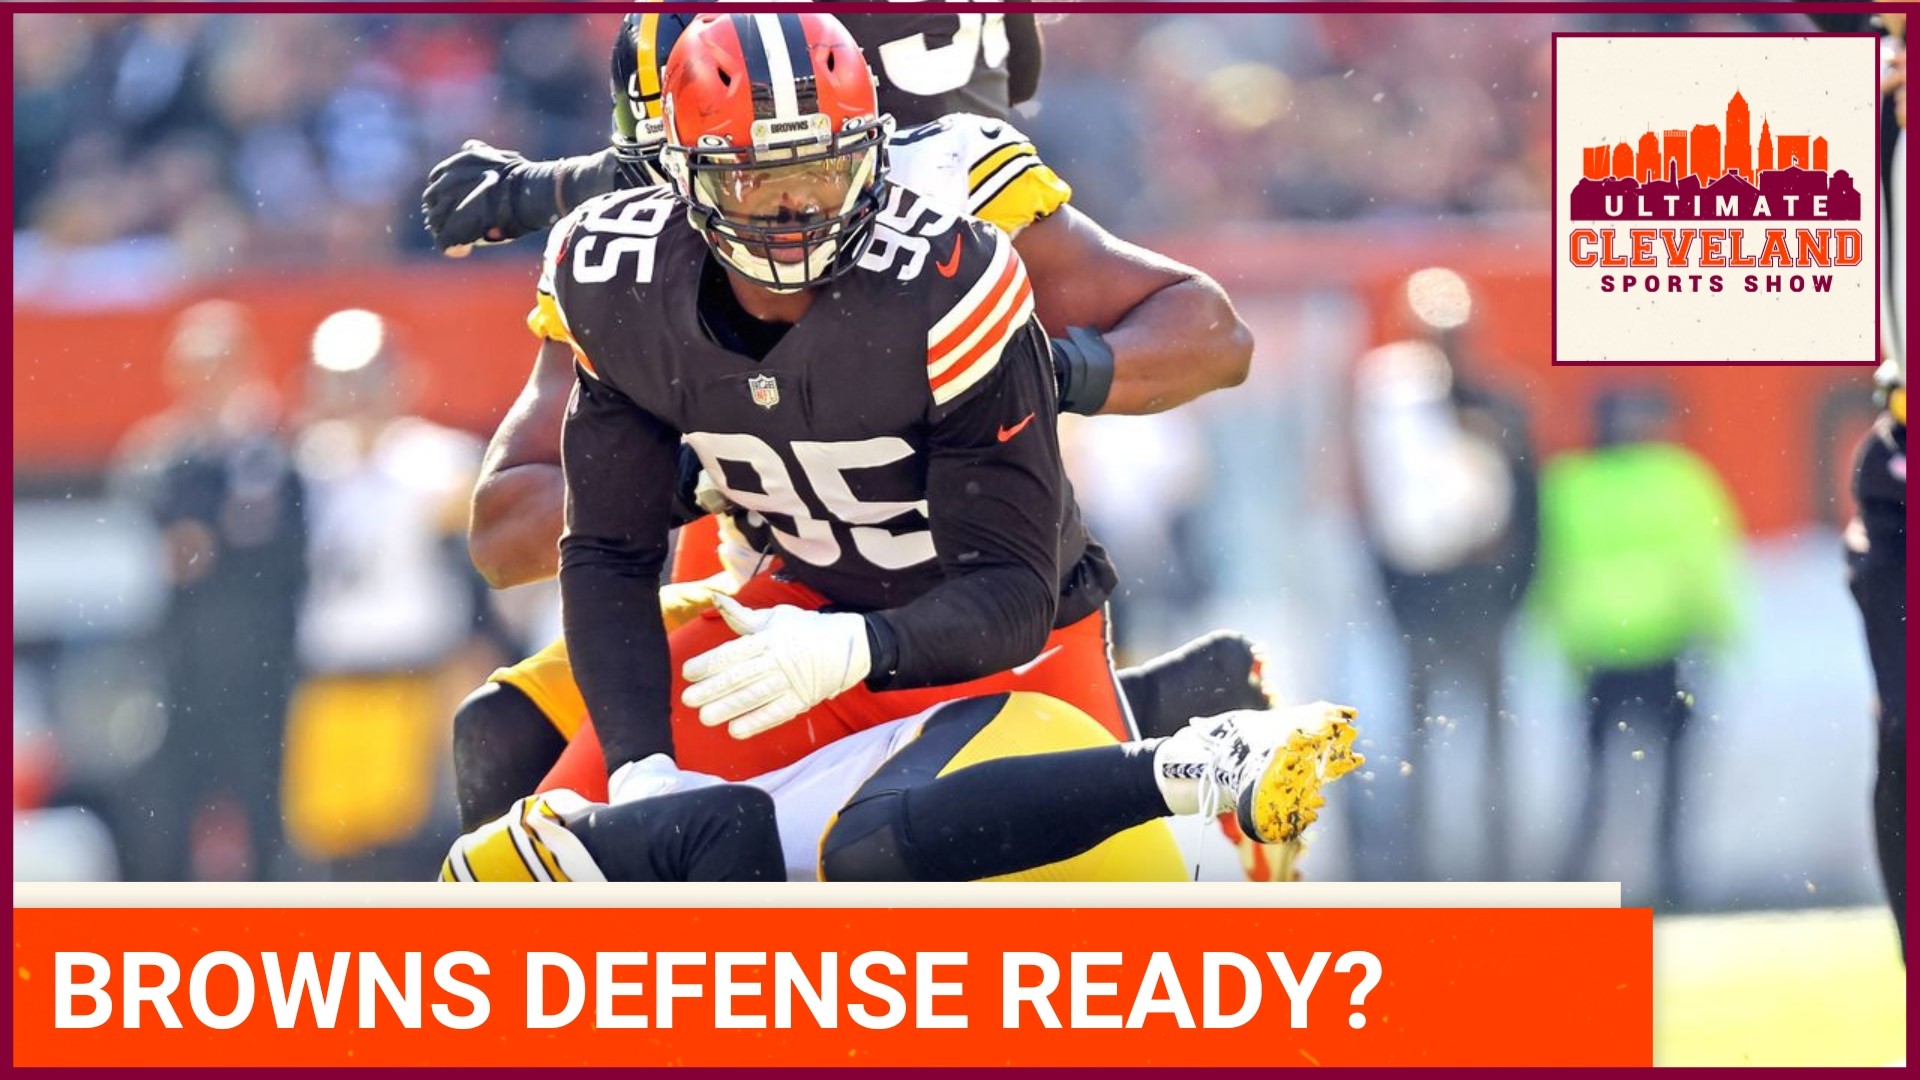 Can the defense of the Cleveland Browns redeem themselves after the late game letdown against the NY Jets?